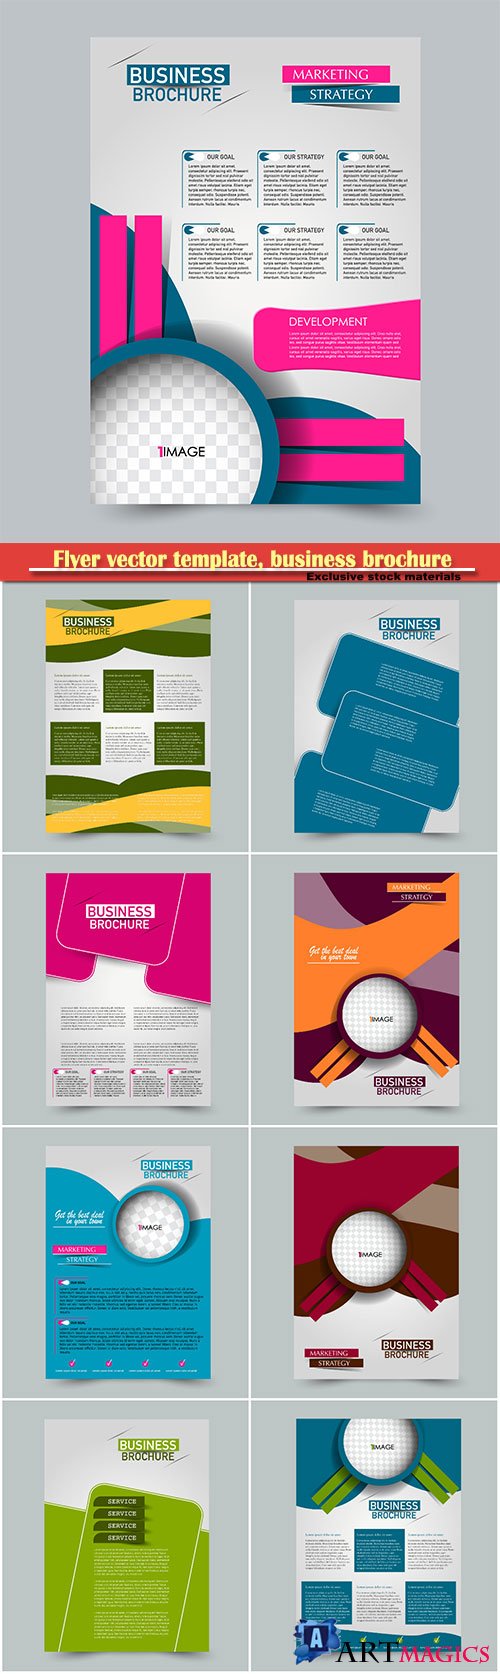 Flyer vector template, business brochure, magazine cover # 6